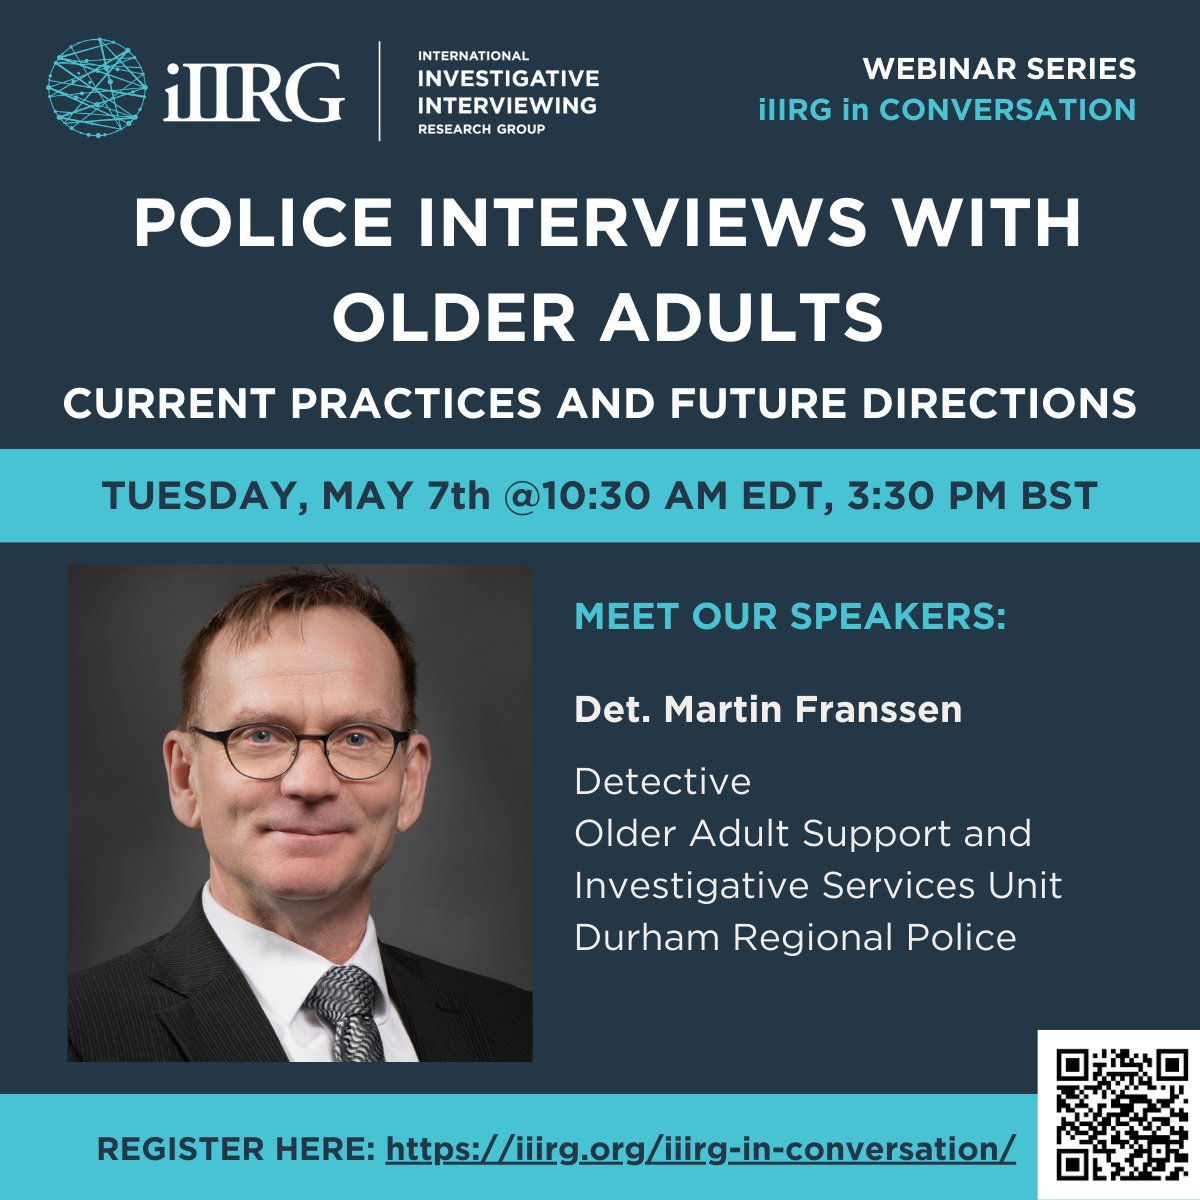 Join our next #iIIRGinConversation webinar to hear from Det. Martin Franssen of the Durham Regional Police Service provide professional practice insights into how to effectively interview older adult witnesses. Read Det. Franssen's bio and register here: iiirg.org/iiirg-in-conve…